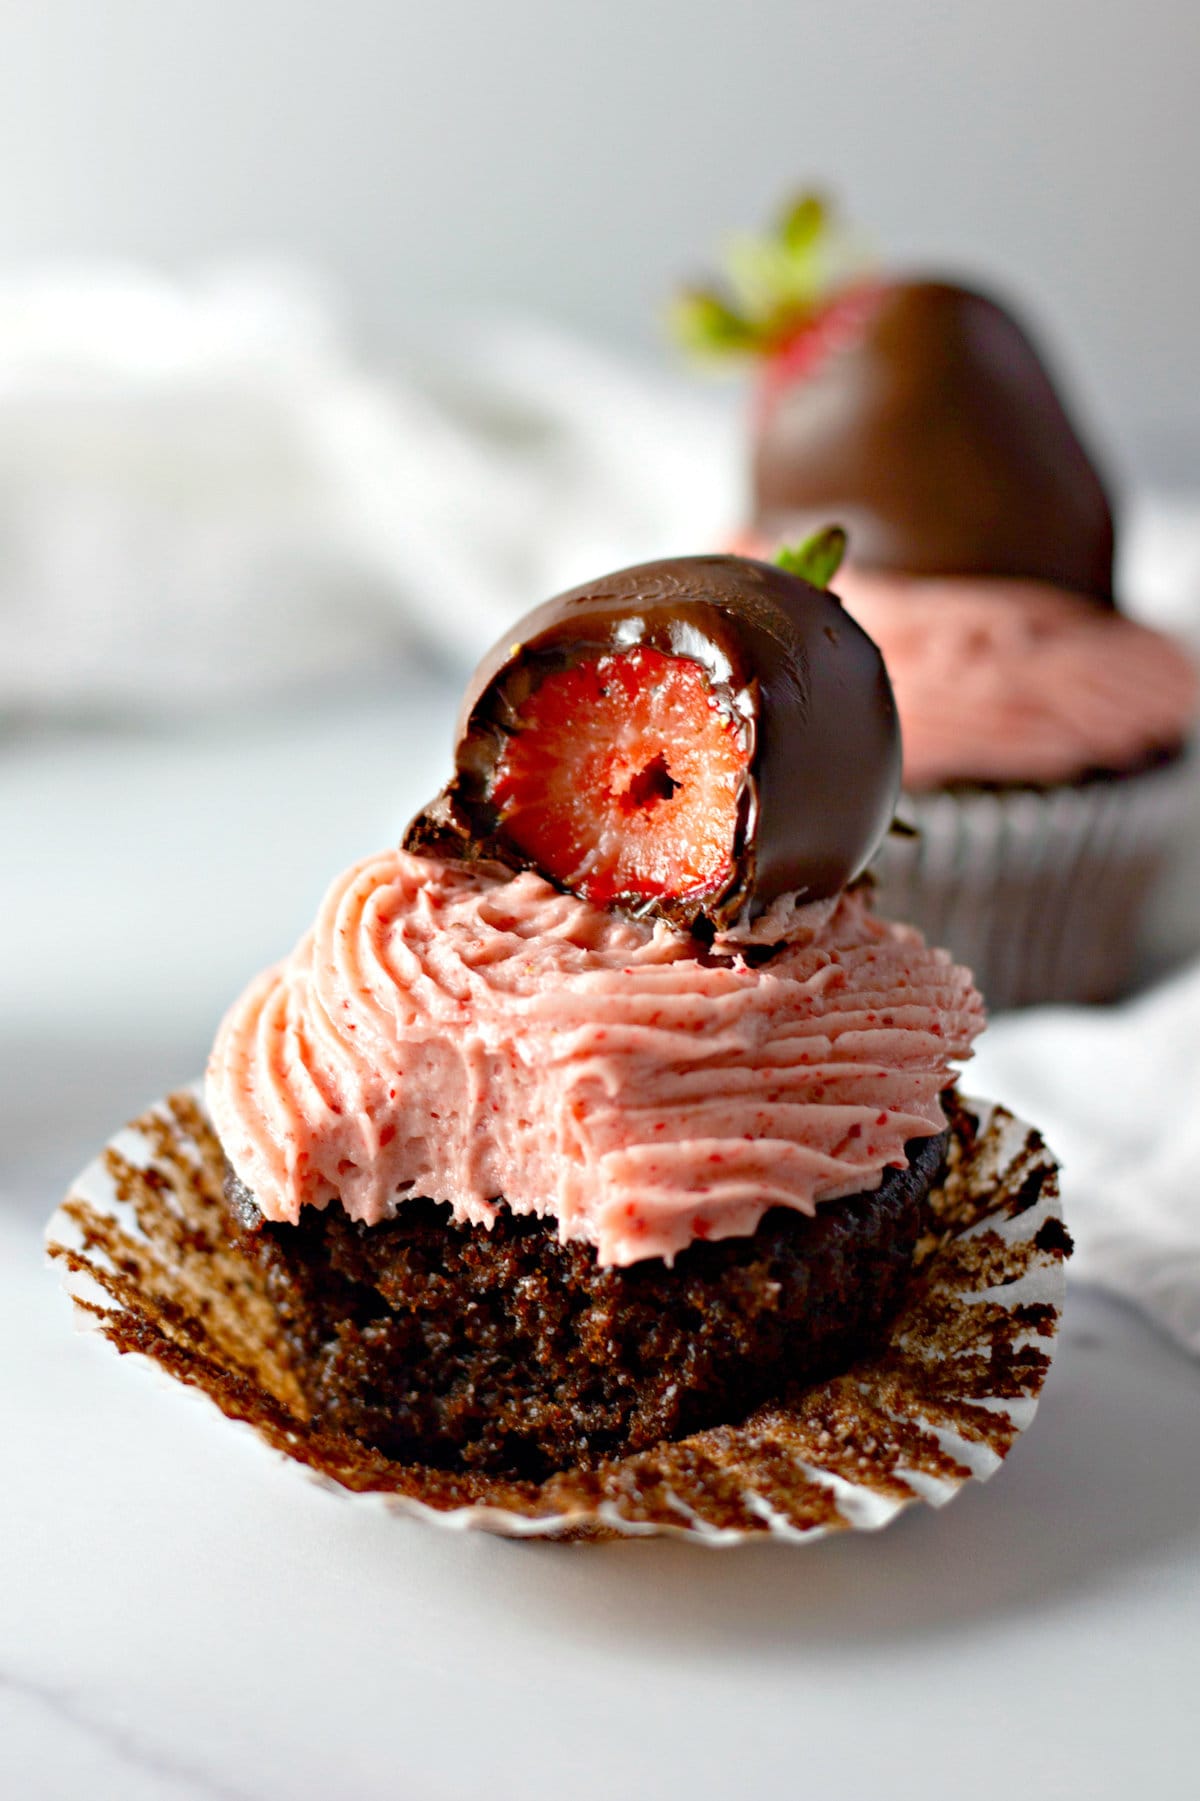 A chocolate covered strawberry cupcake with a bite missing from both the strawberry and cupcake